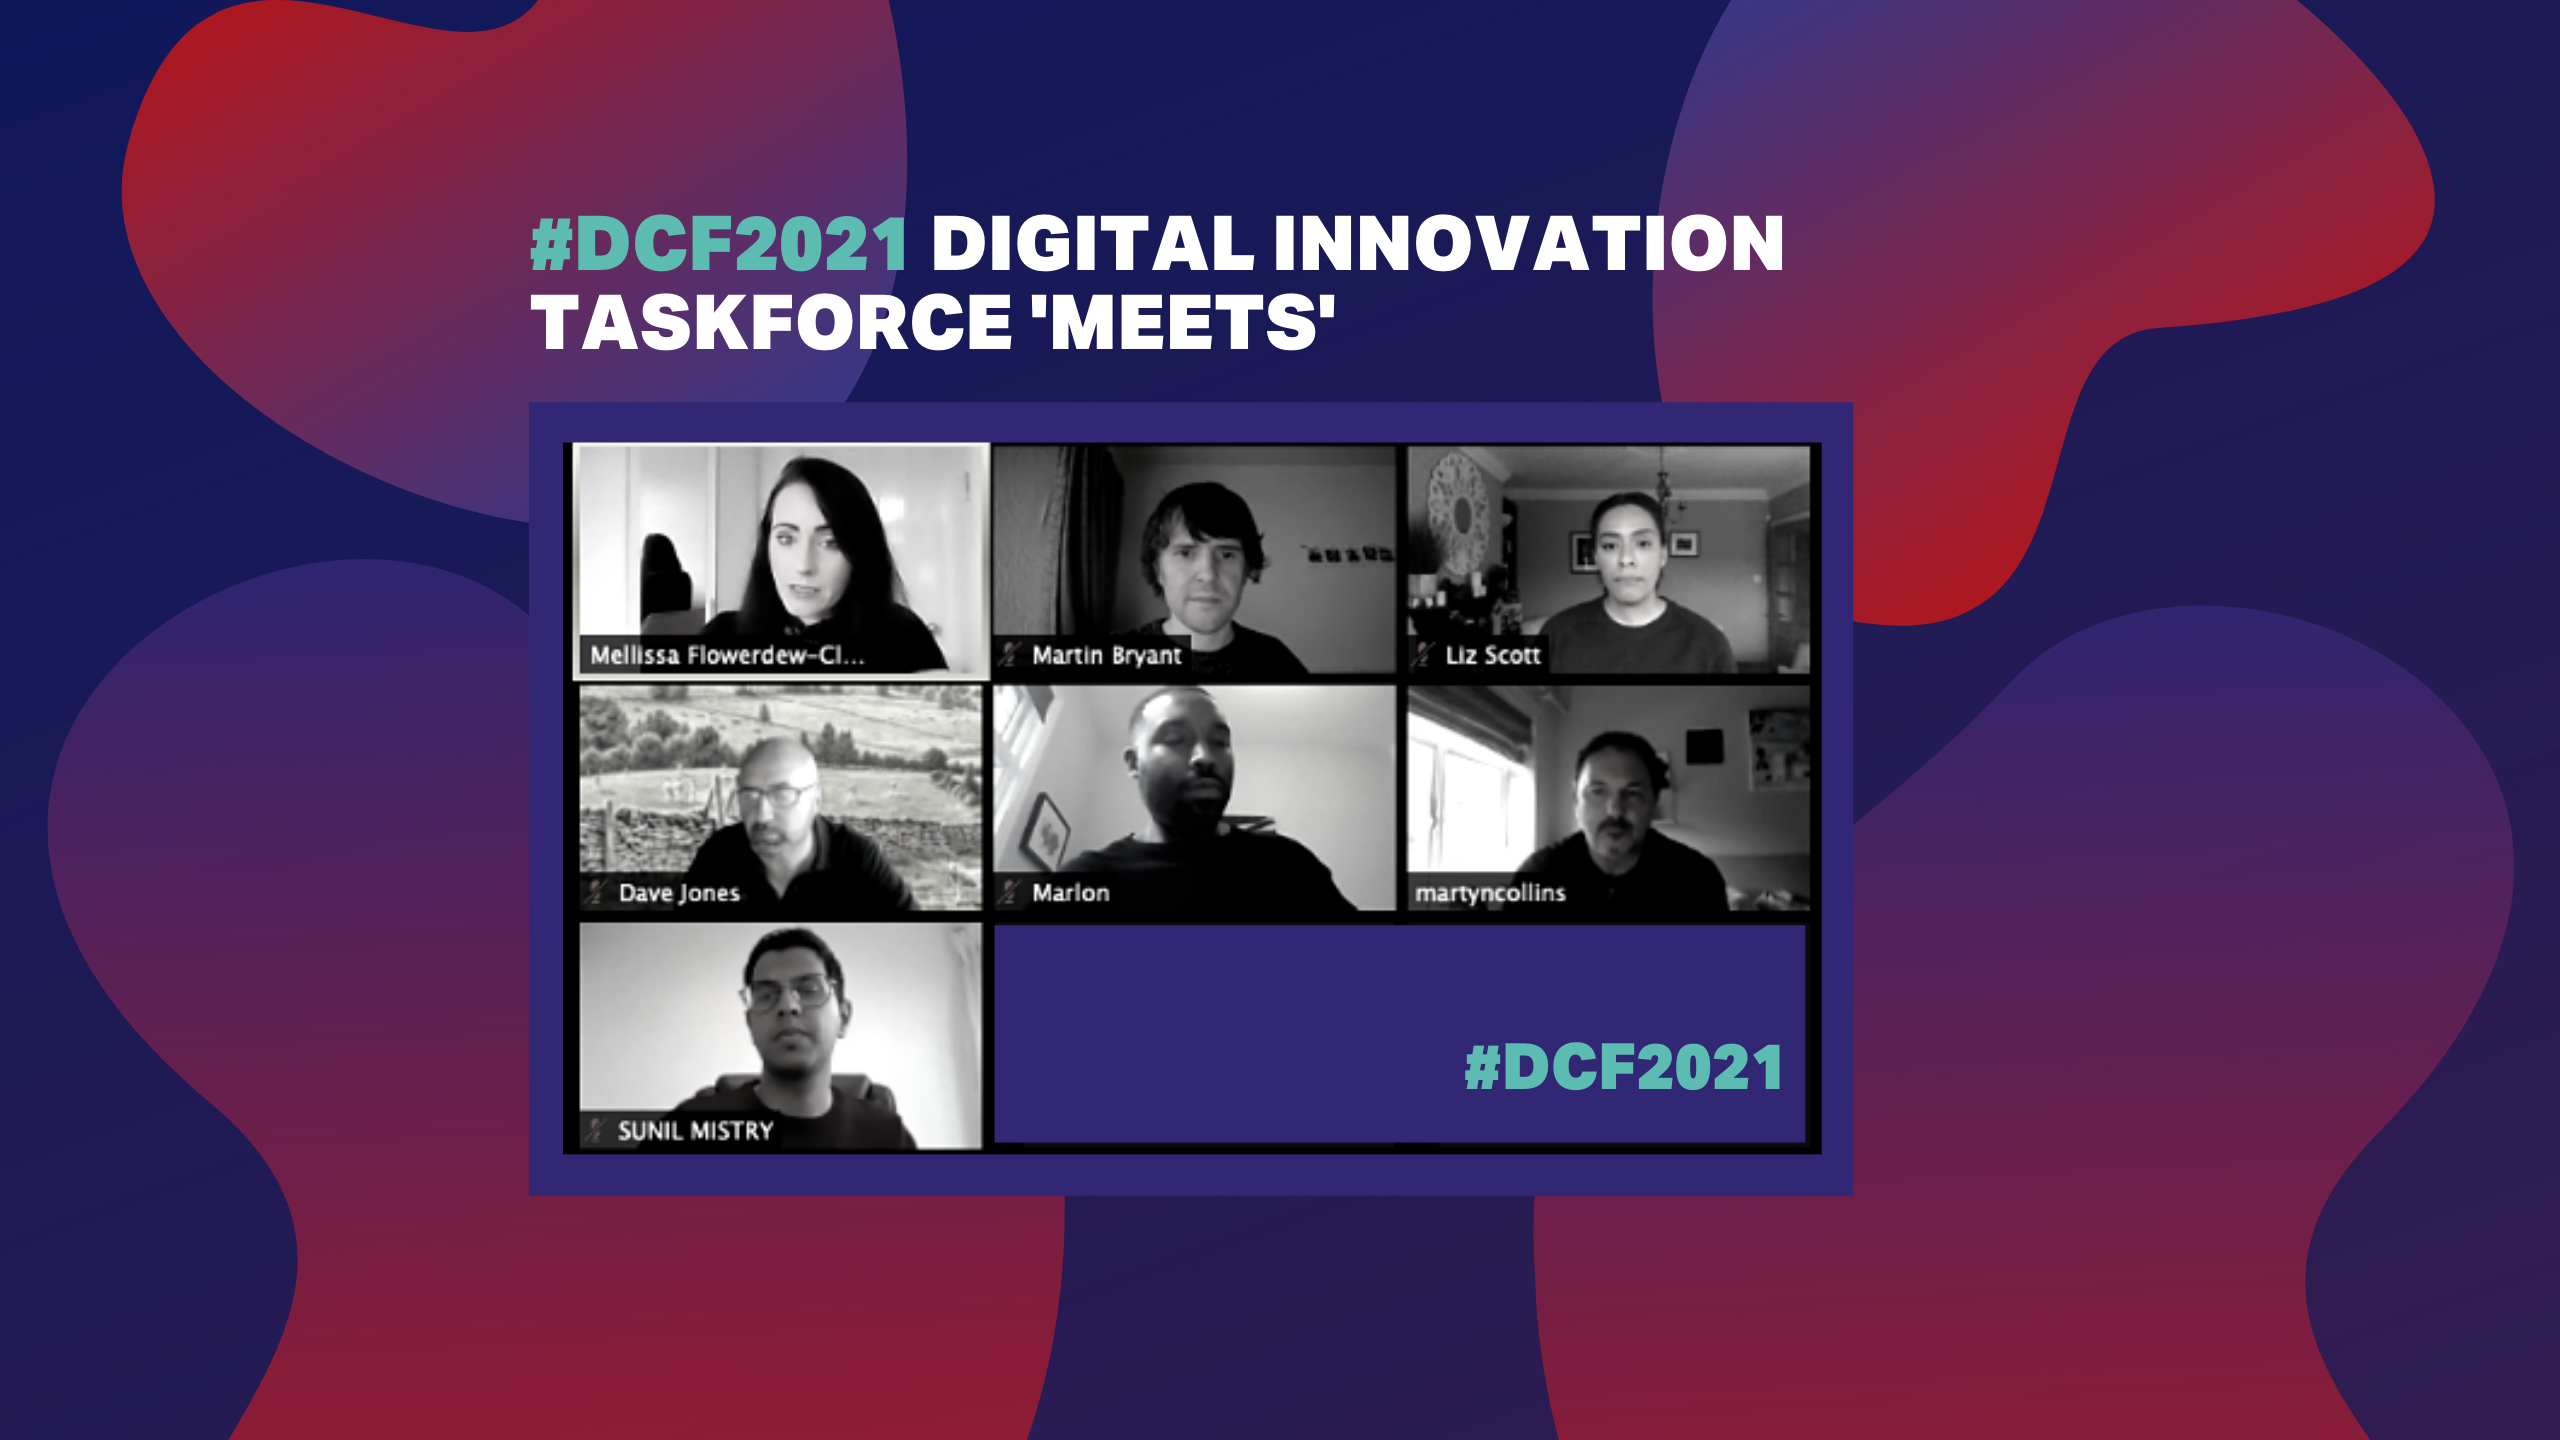 Our Digital Innovation Taskforce 'meets' to discuss priorities for #DCF2021